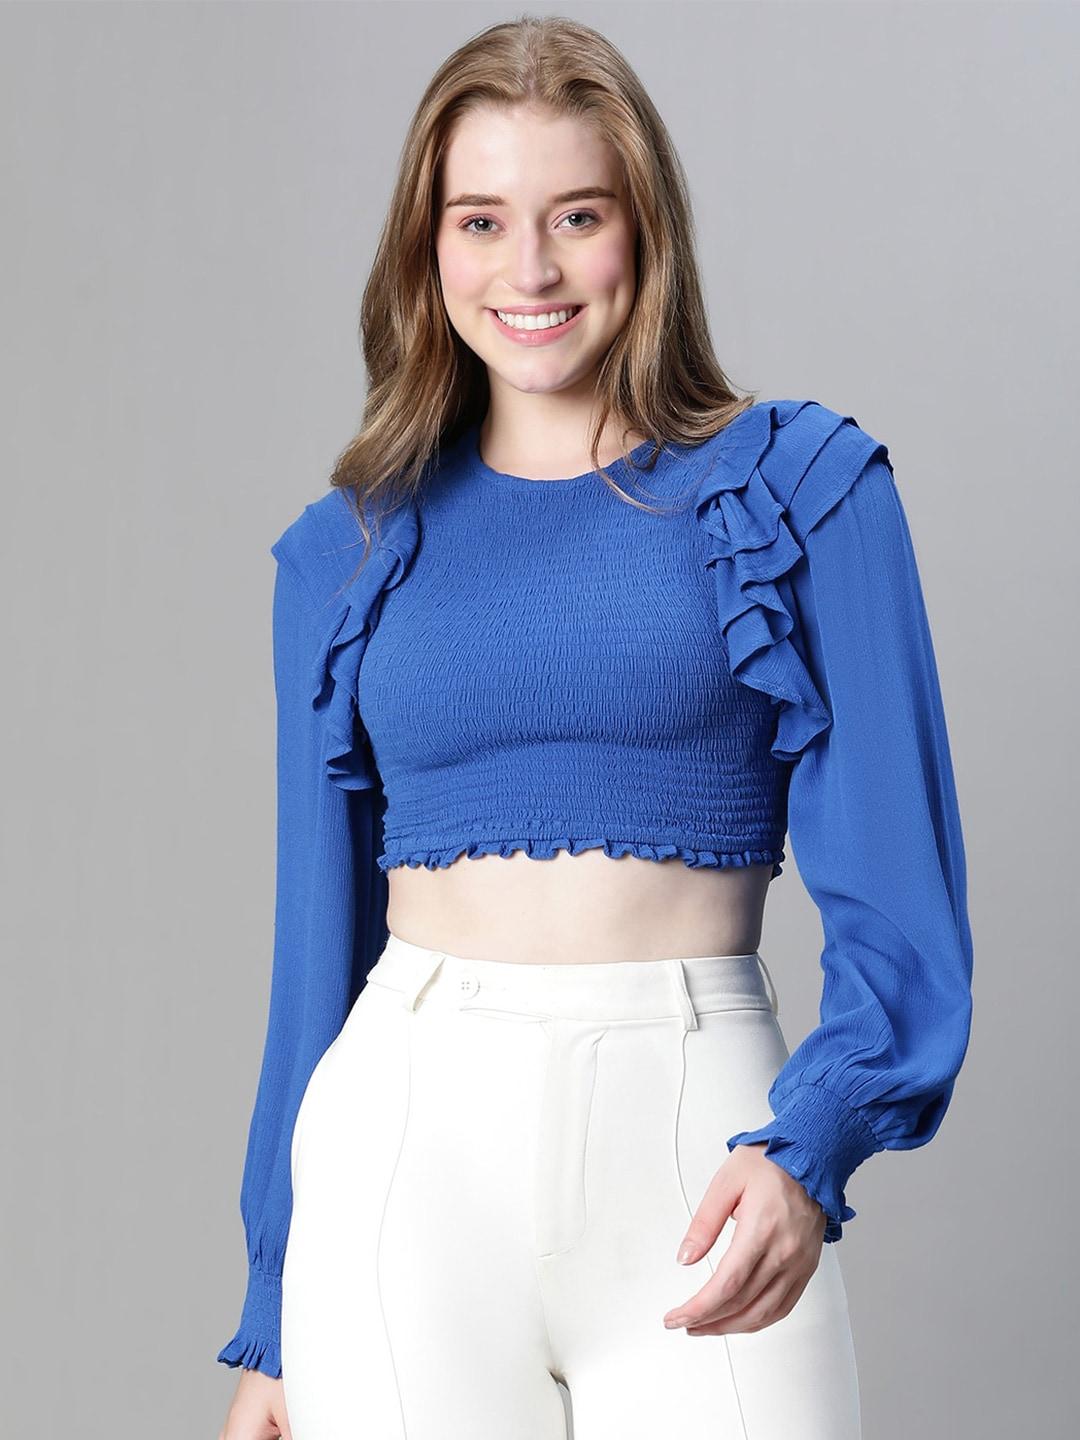 oxolloxo round neck cuffed sleeves ruffles smocked crop fitted top